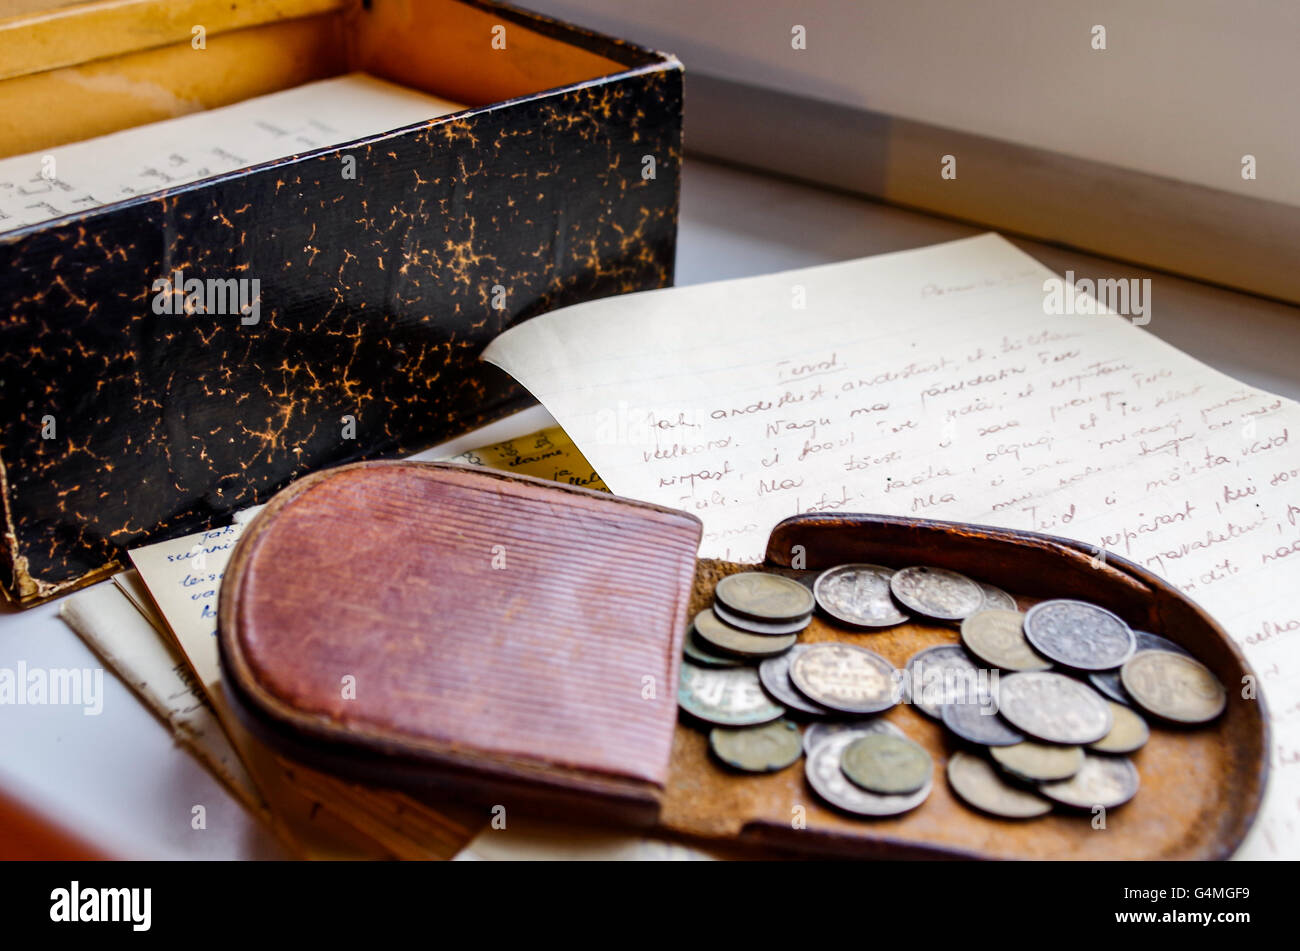 Leather coin pouch with coins from Russian Empire and a box of handwritten love letters from 2nd World War era Stock Photo